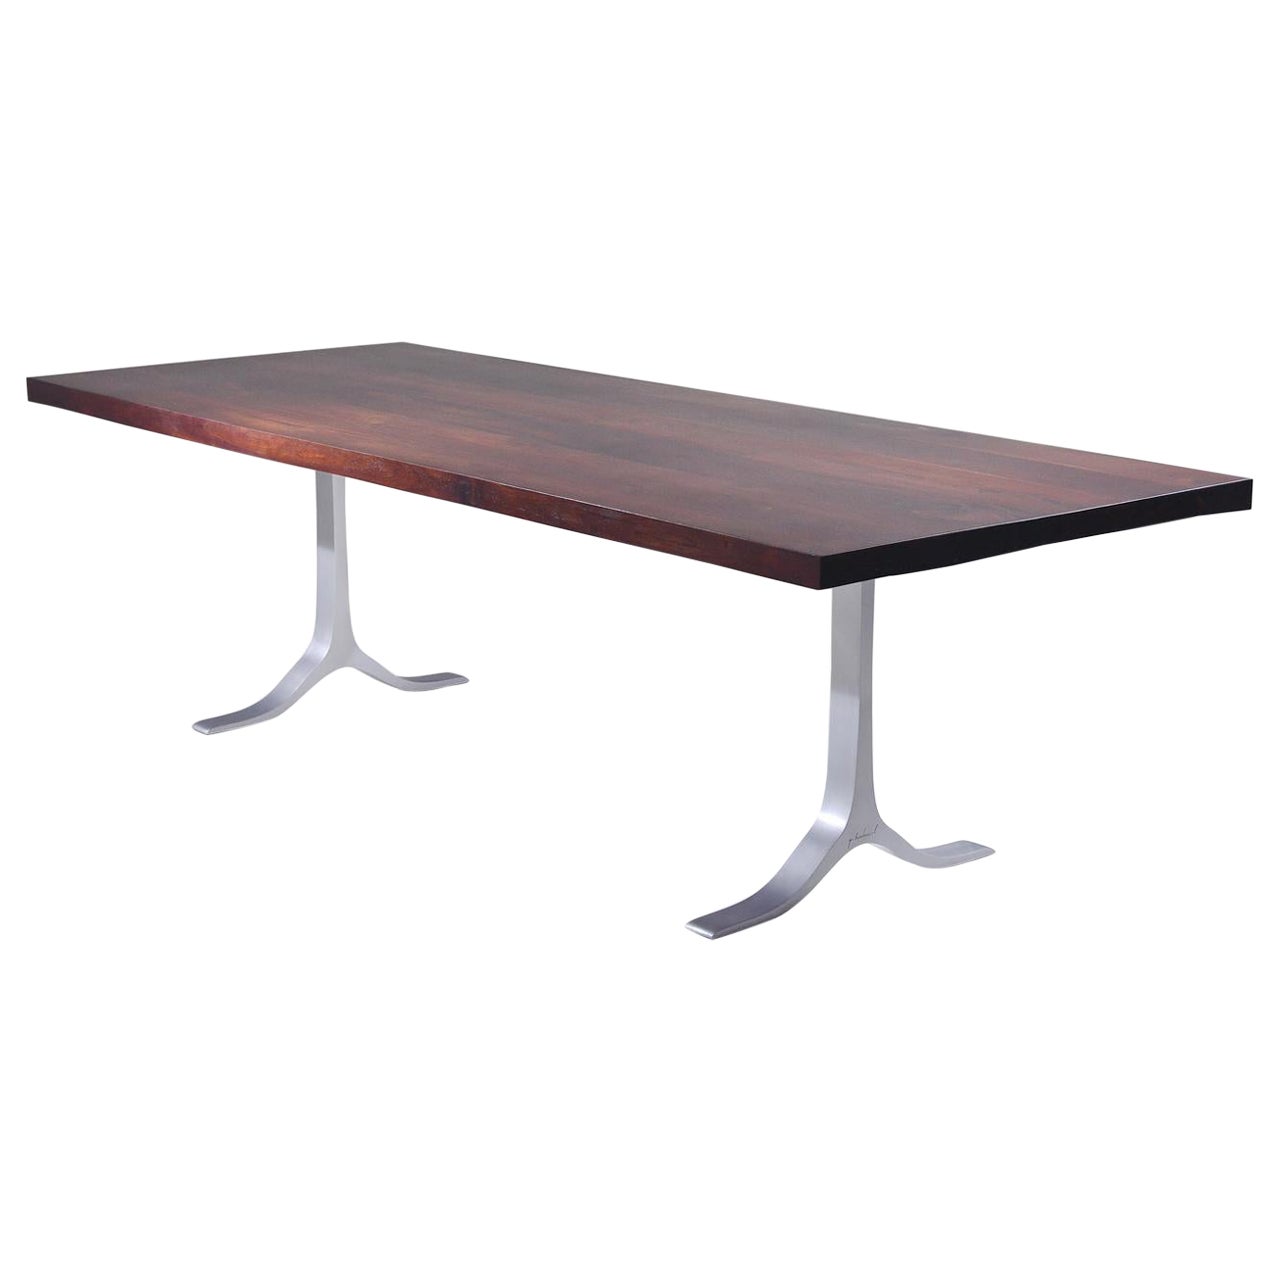 Bespoke Dining Table, Reclaimed Wood, Sand Cast Aluminum Base, by P. Tendercool For Sale